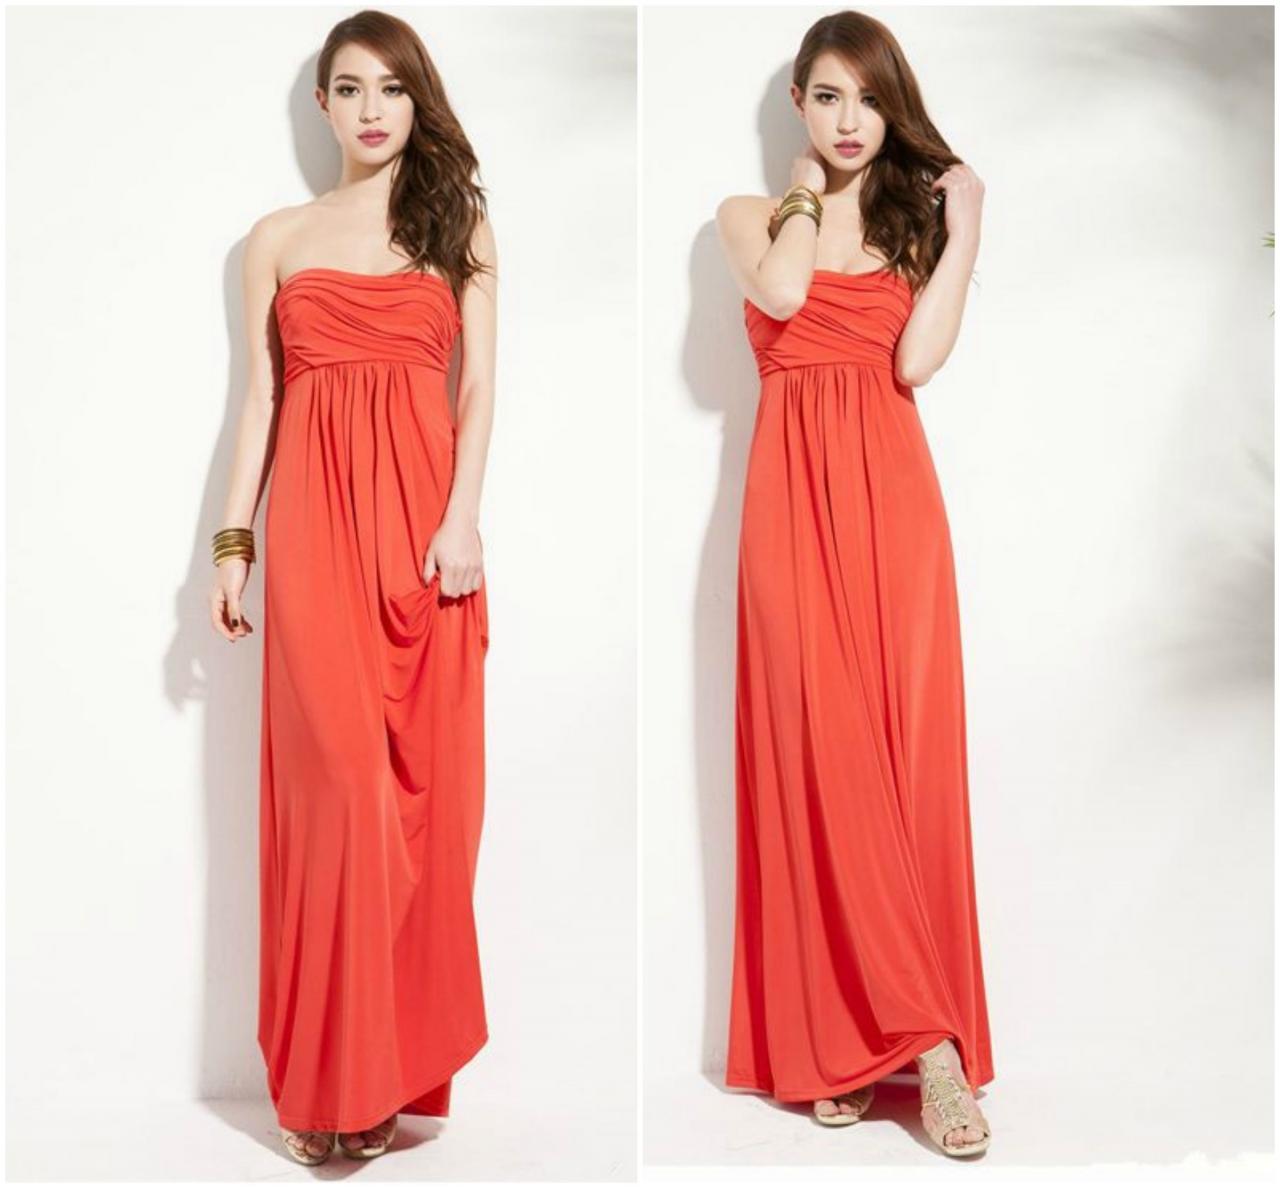 Strapless Tube Dress In Water Melon Red